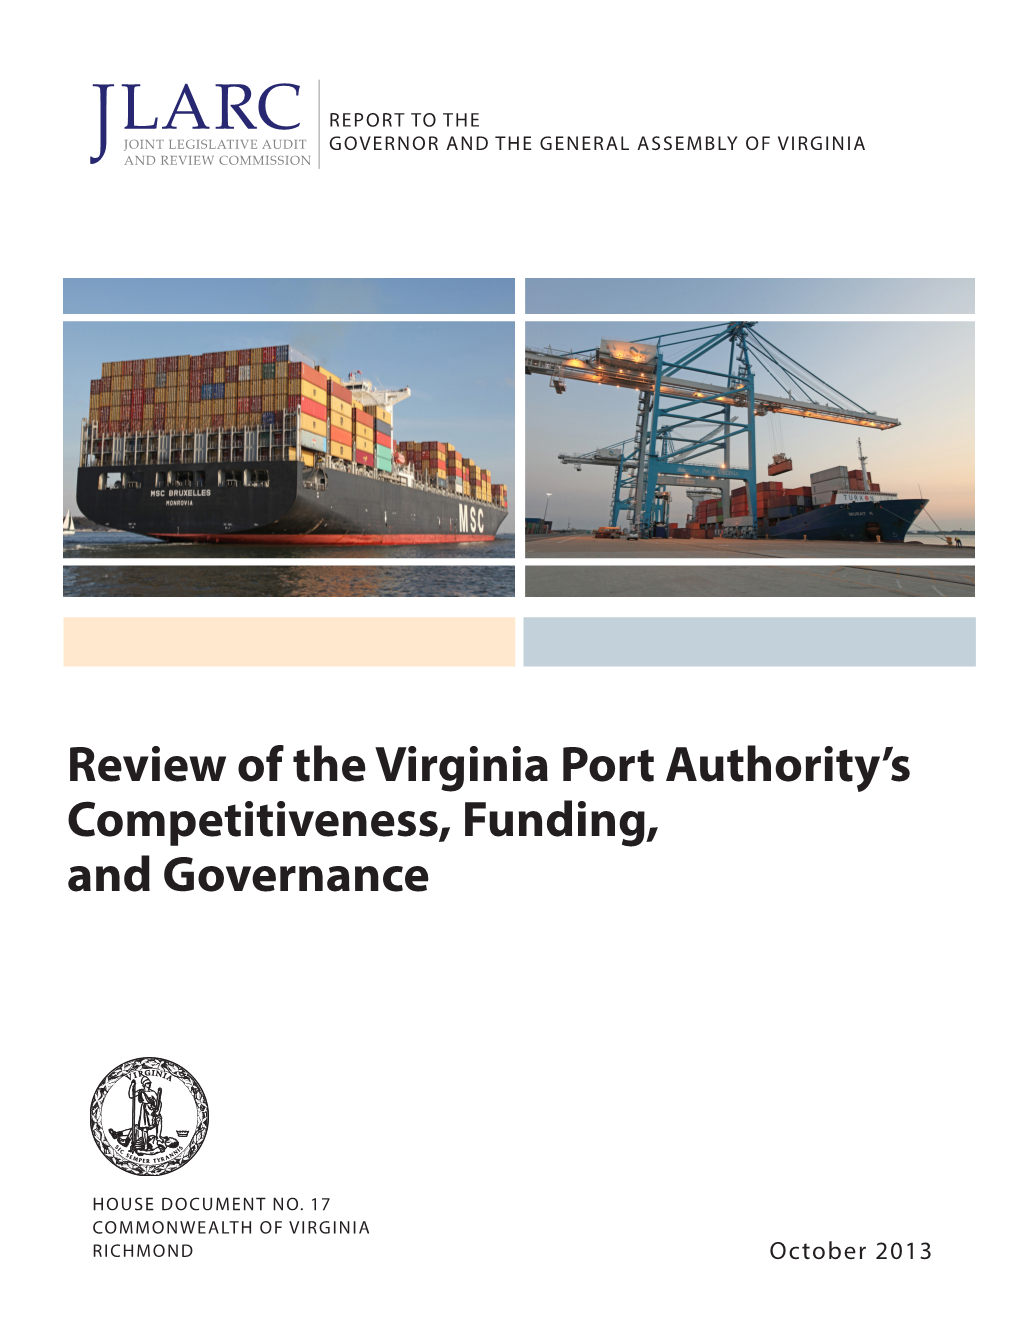 Review of the Virginia Port Authority's Competitiveness, Funding, And